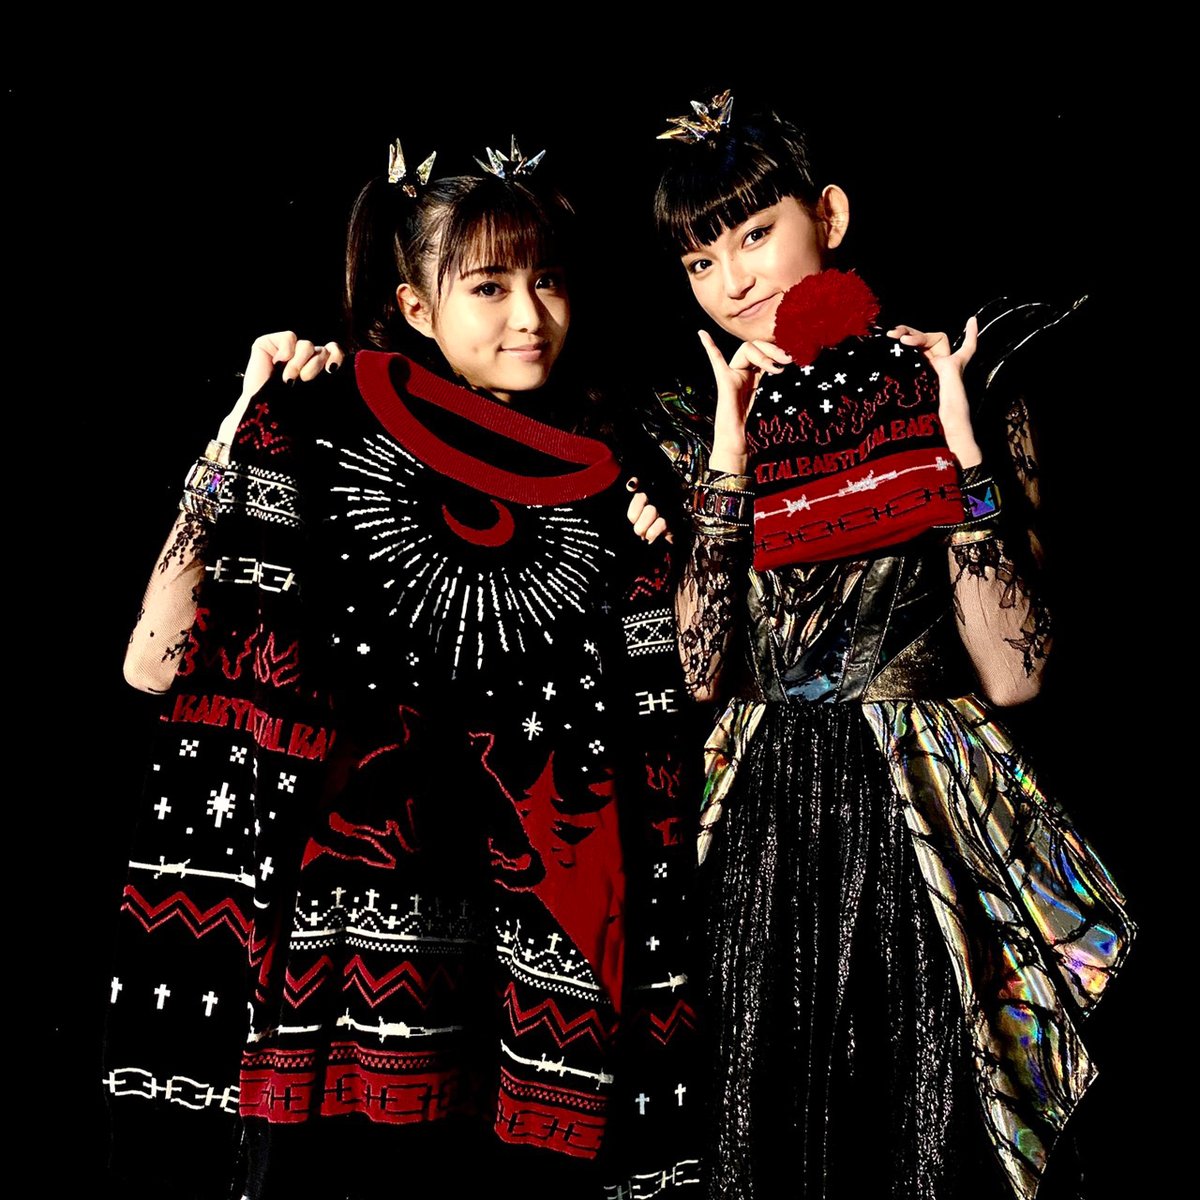 Babymetal Babymetal Holiday Merch Now Available At Uk Store T Co Rmxqczr06q Us Store T Co Gkmt785ohj Babymetal Holiday Uglychristmassweater T Co Lhftwoaxg7